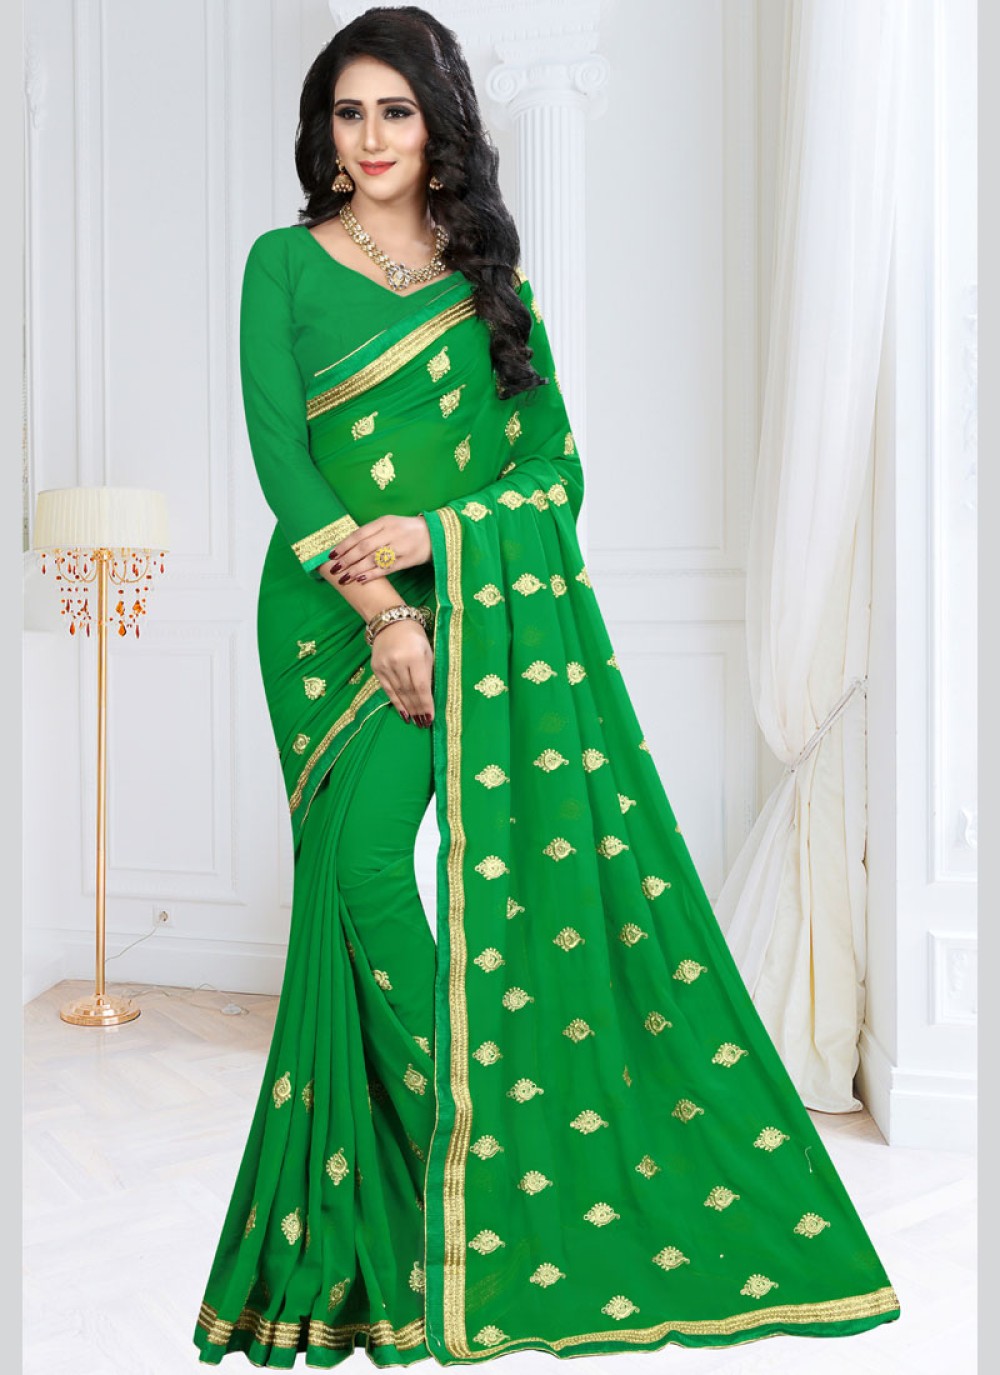 Lace Faux Georgette Green Saree